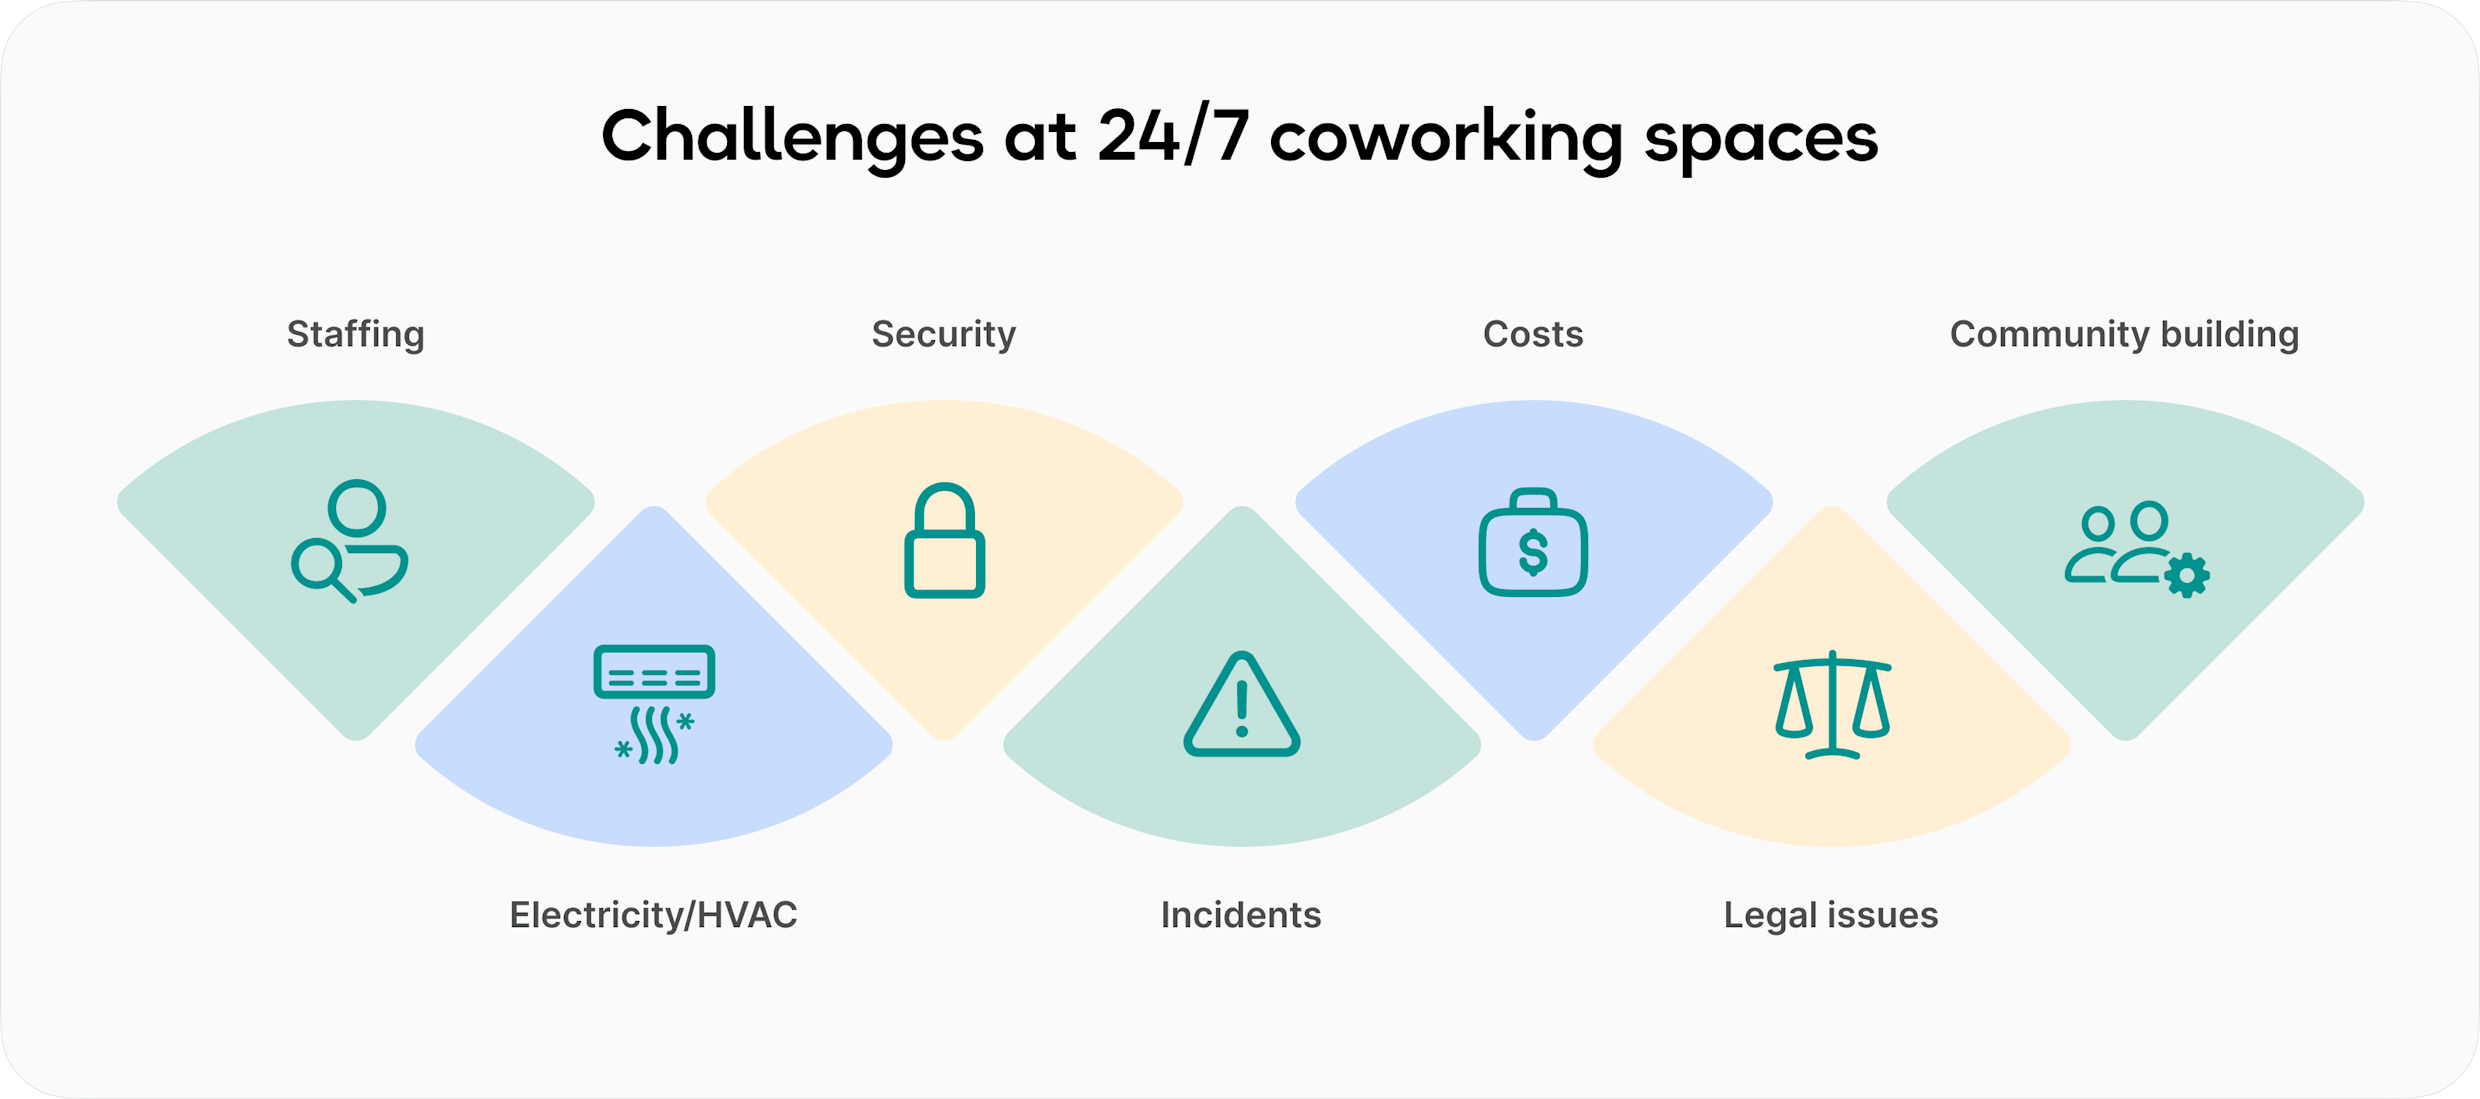 Challenges at 24/7 coworking spaces